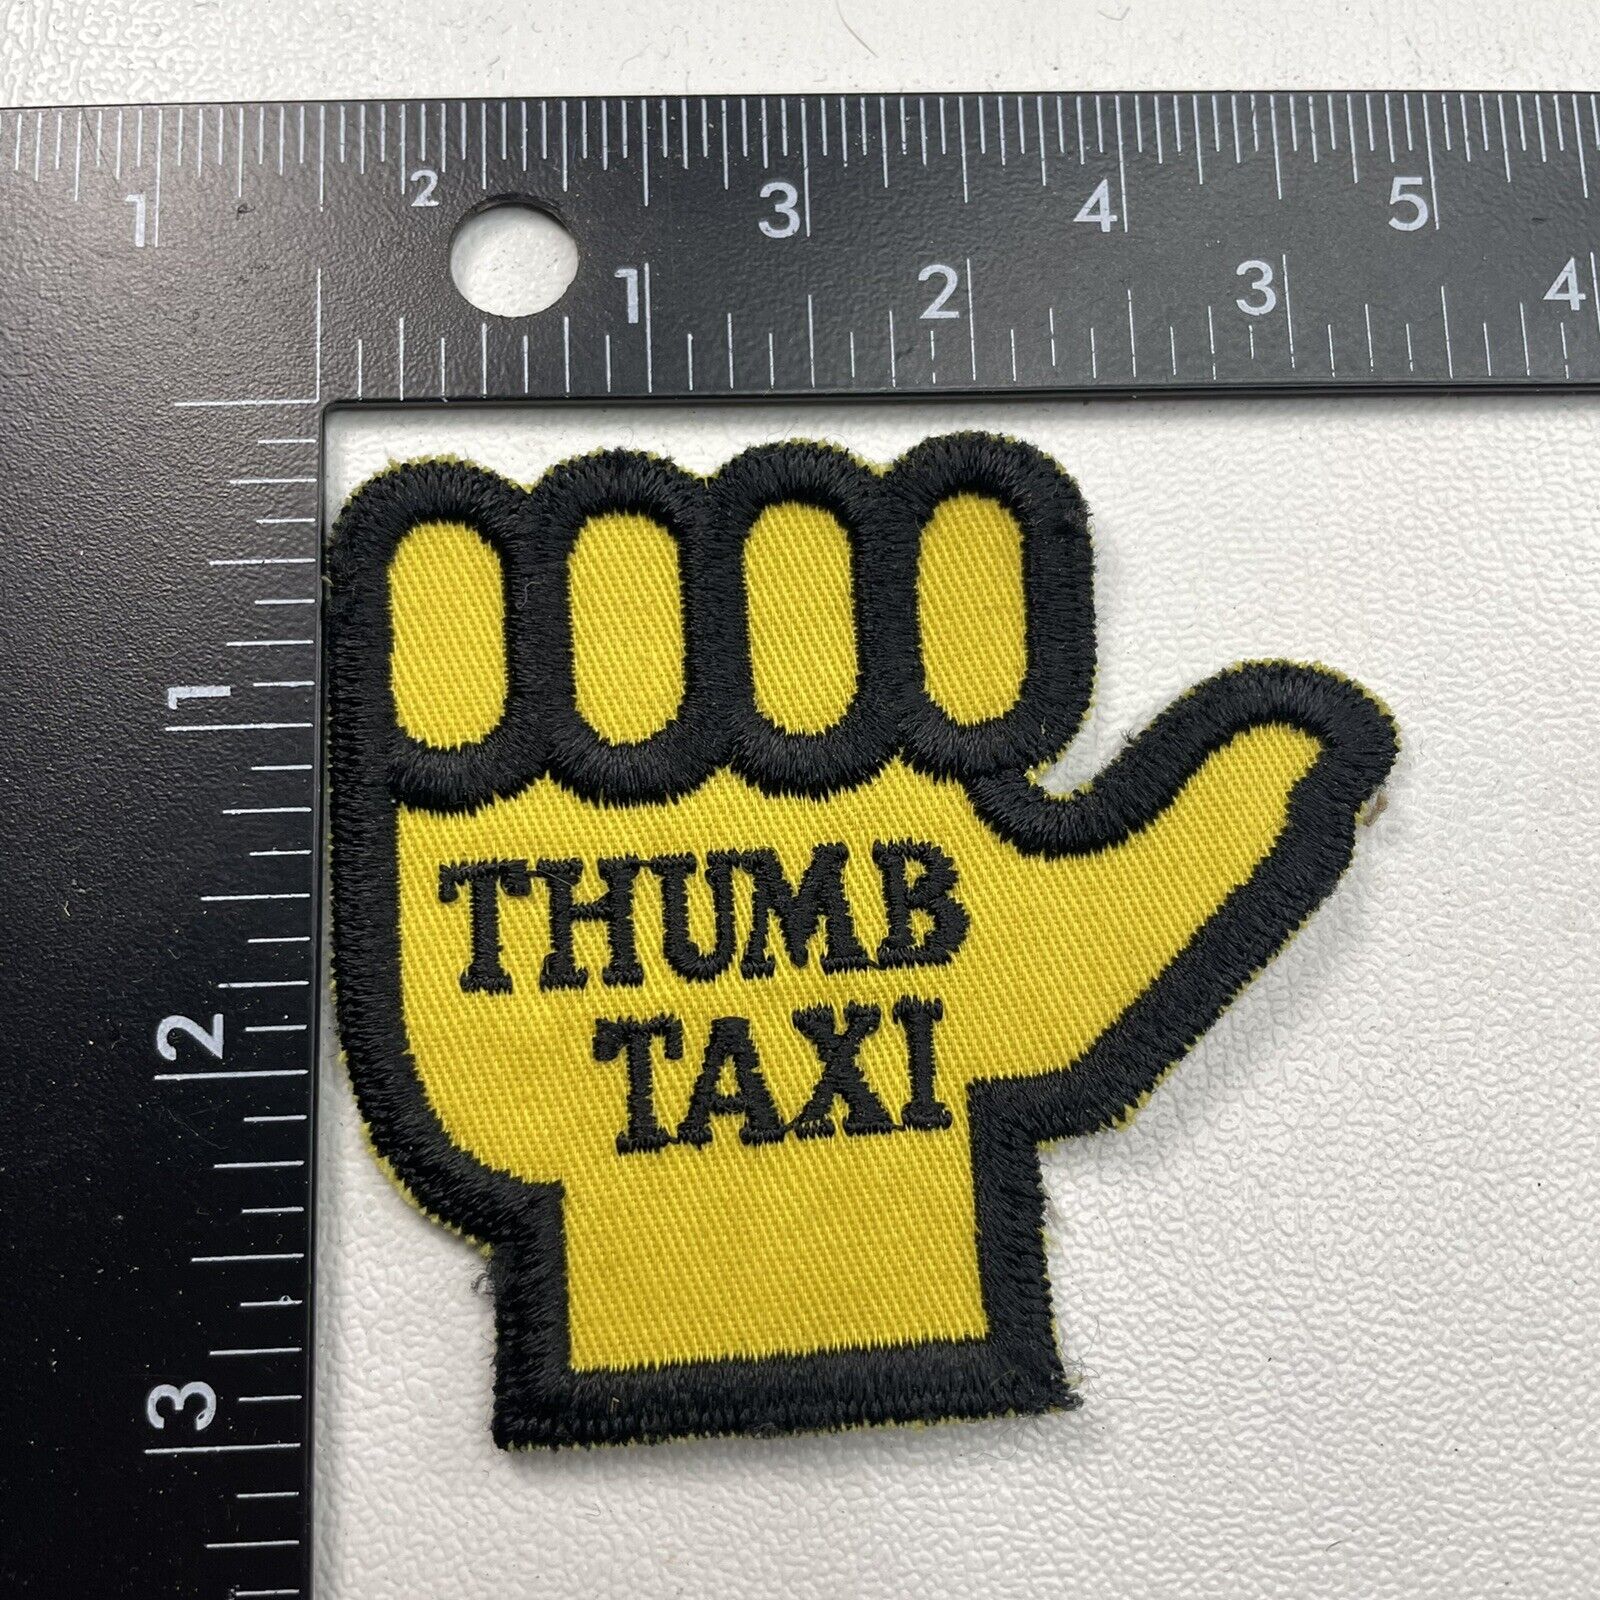 Vintage Max 66% OFF Hitchhiker THUMB Oklahoma City Mall TAXI Patch In 82M2 Great Condition